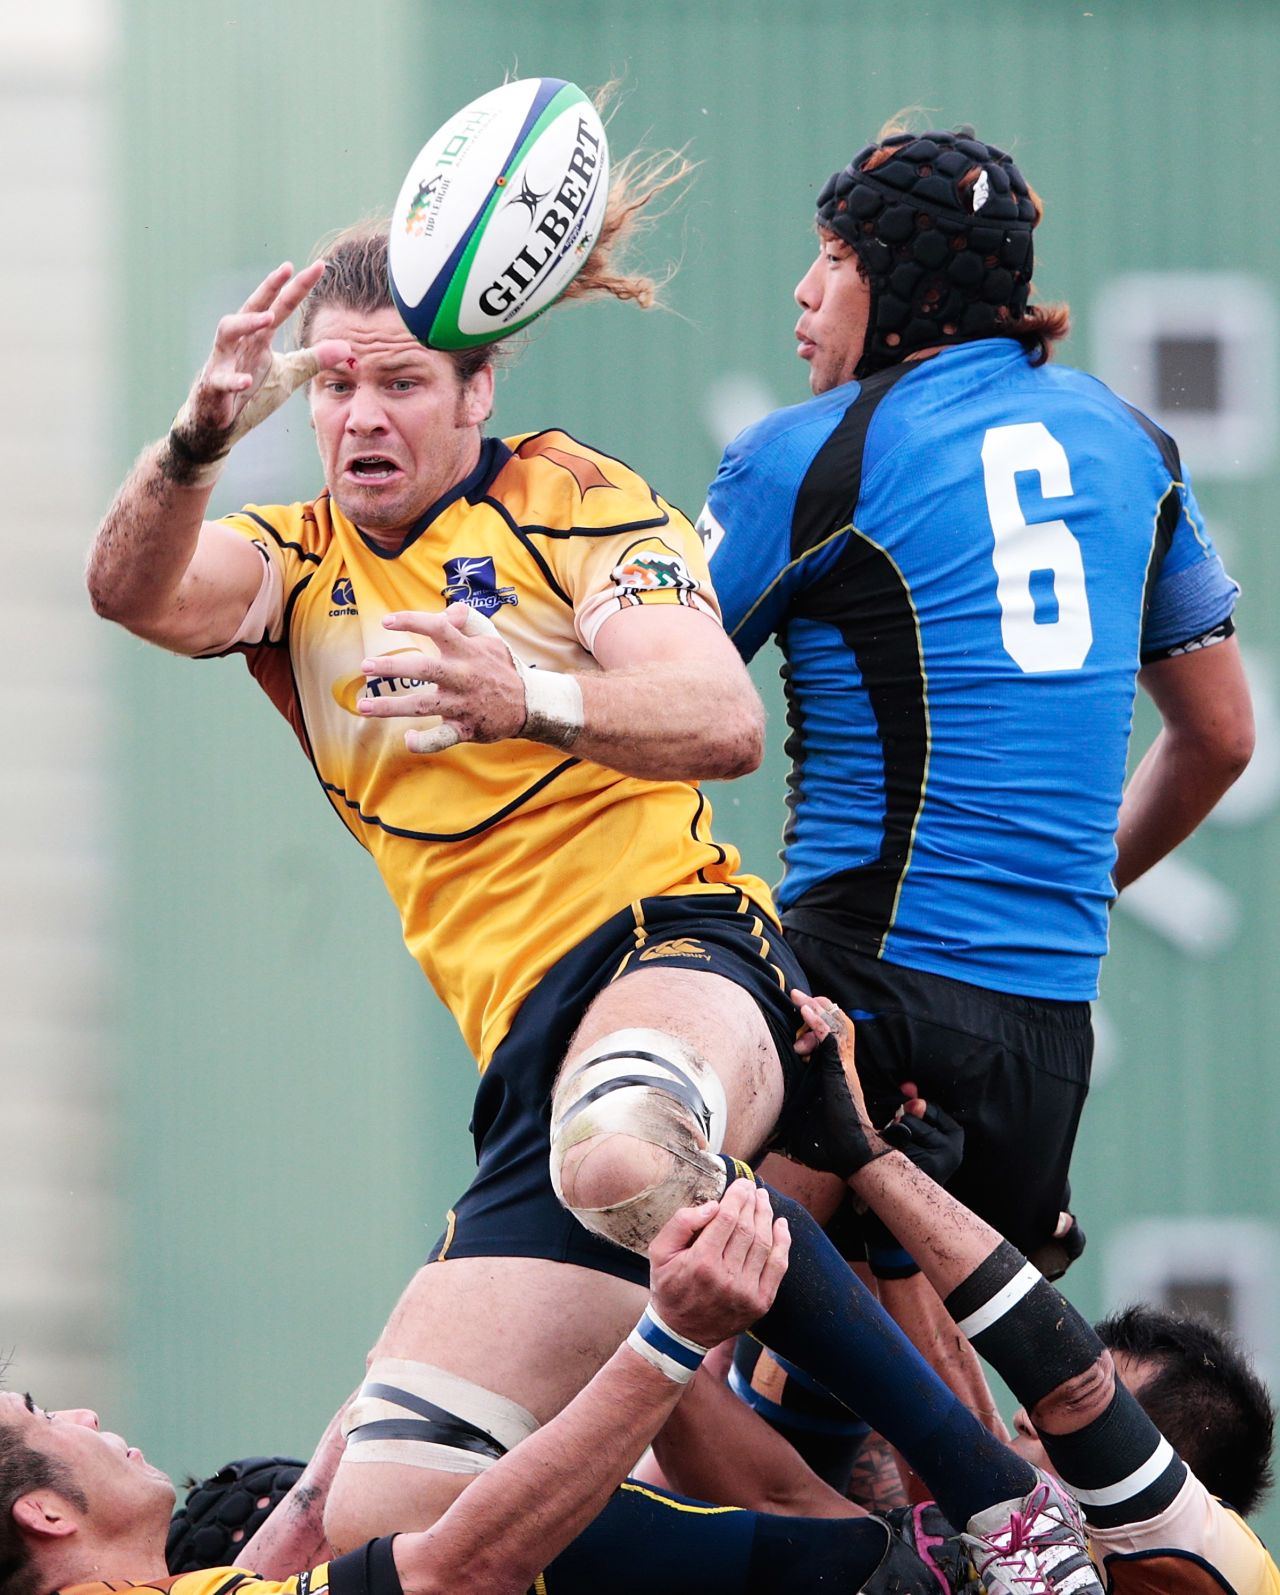 As well as playing in the US, Clever also had stints in Japan's Top League with Suntory Sungoliath and the NTT Communications Shining Arcs (pictured).